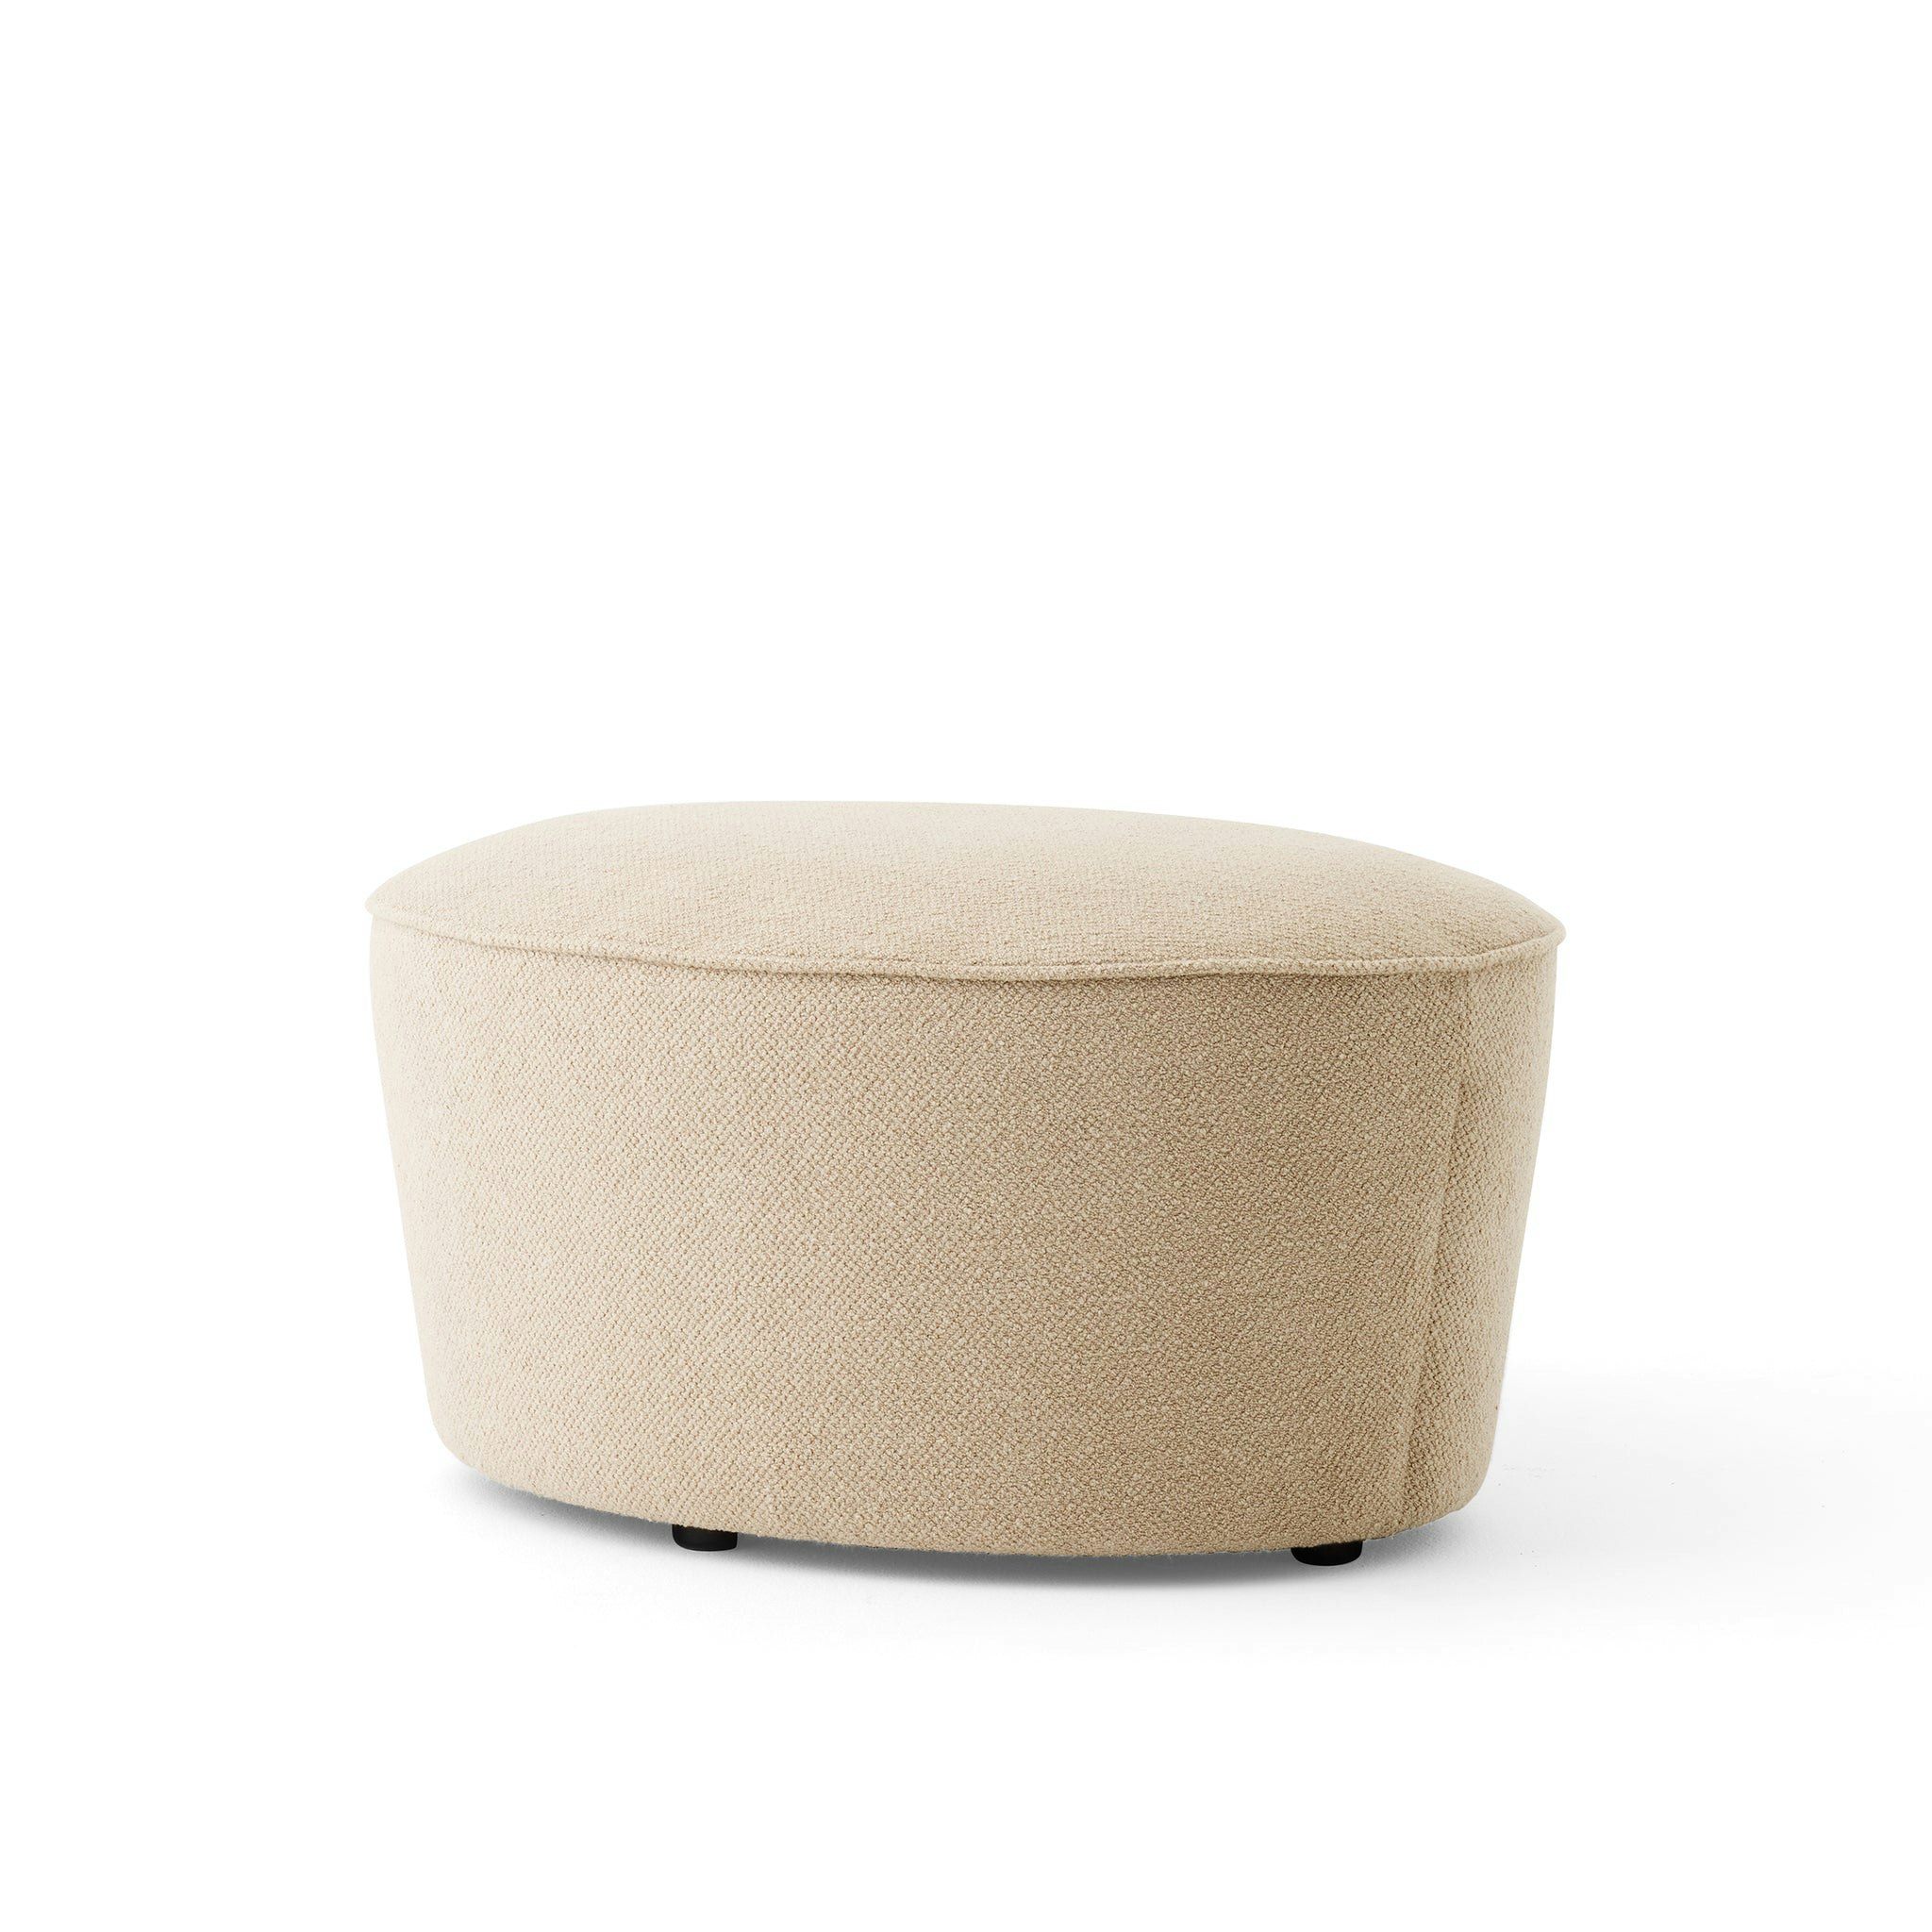 Cairn Pouf by Nick Ross for Menu